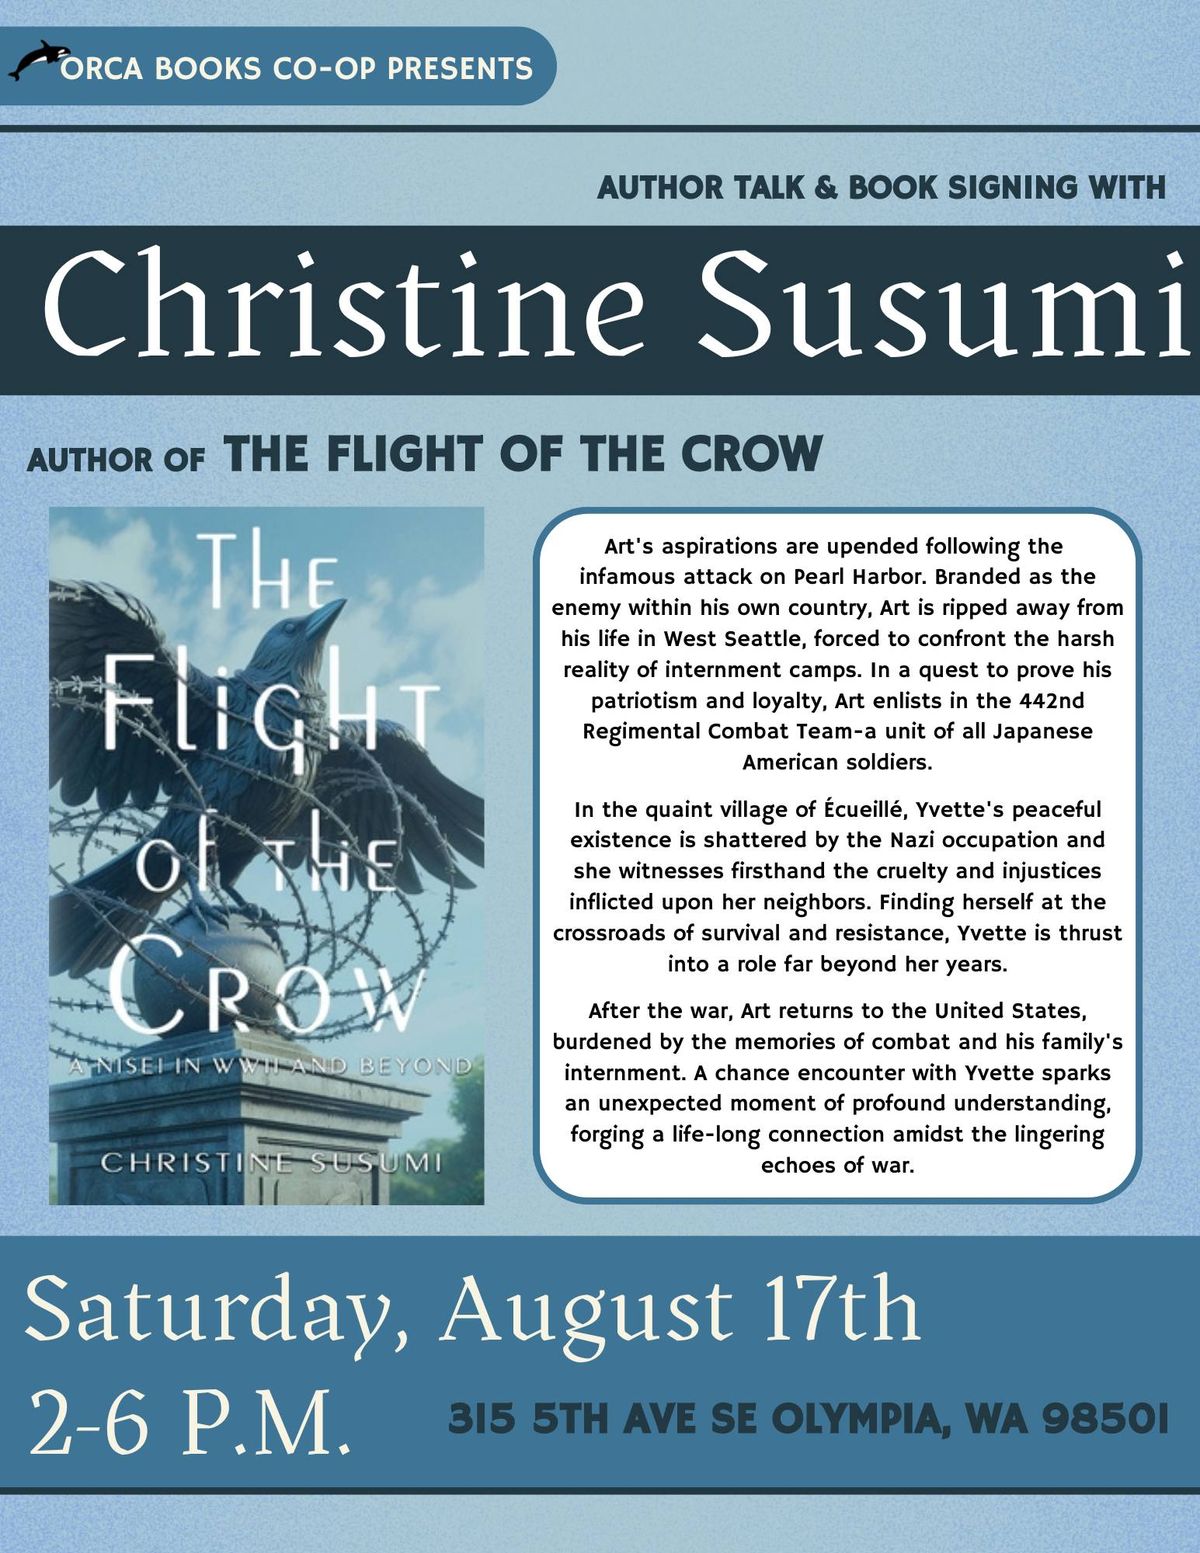 Author Talk and Signing with Christine Susumi